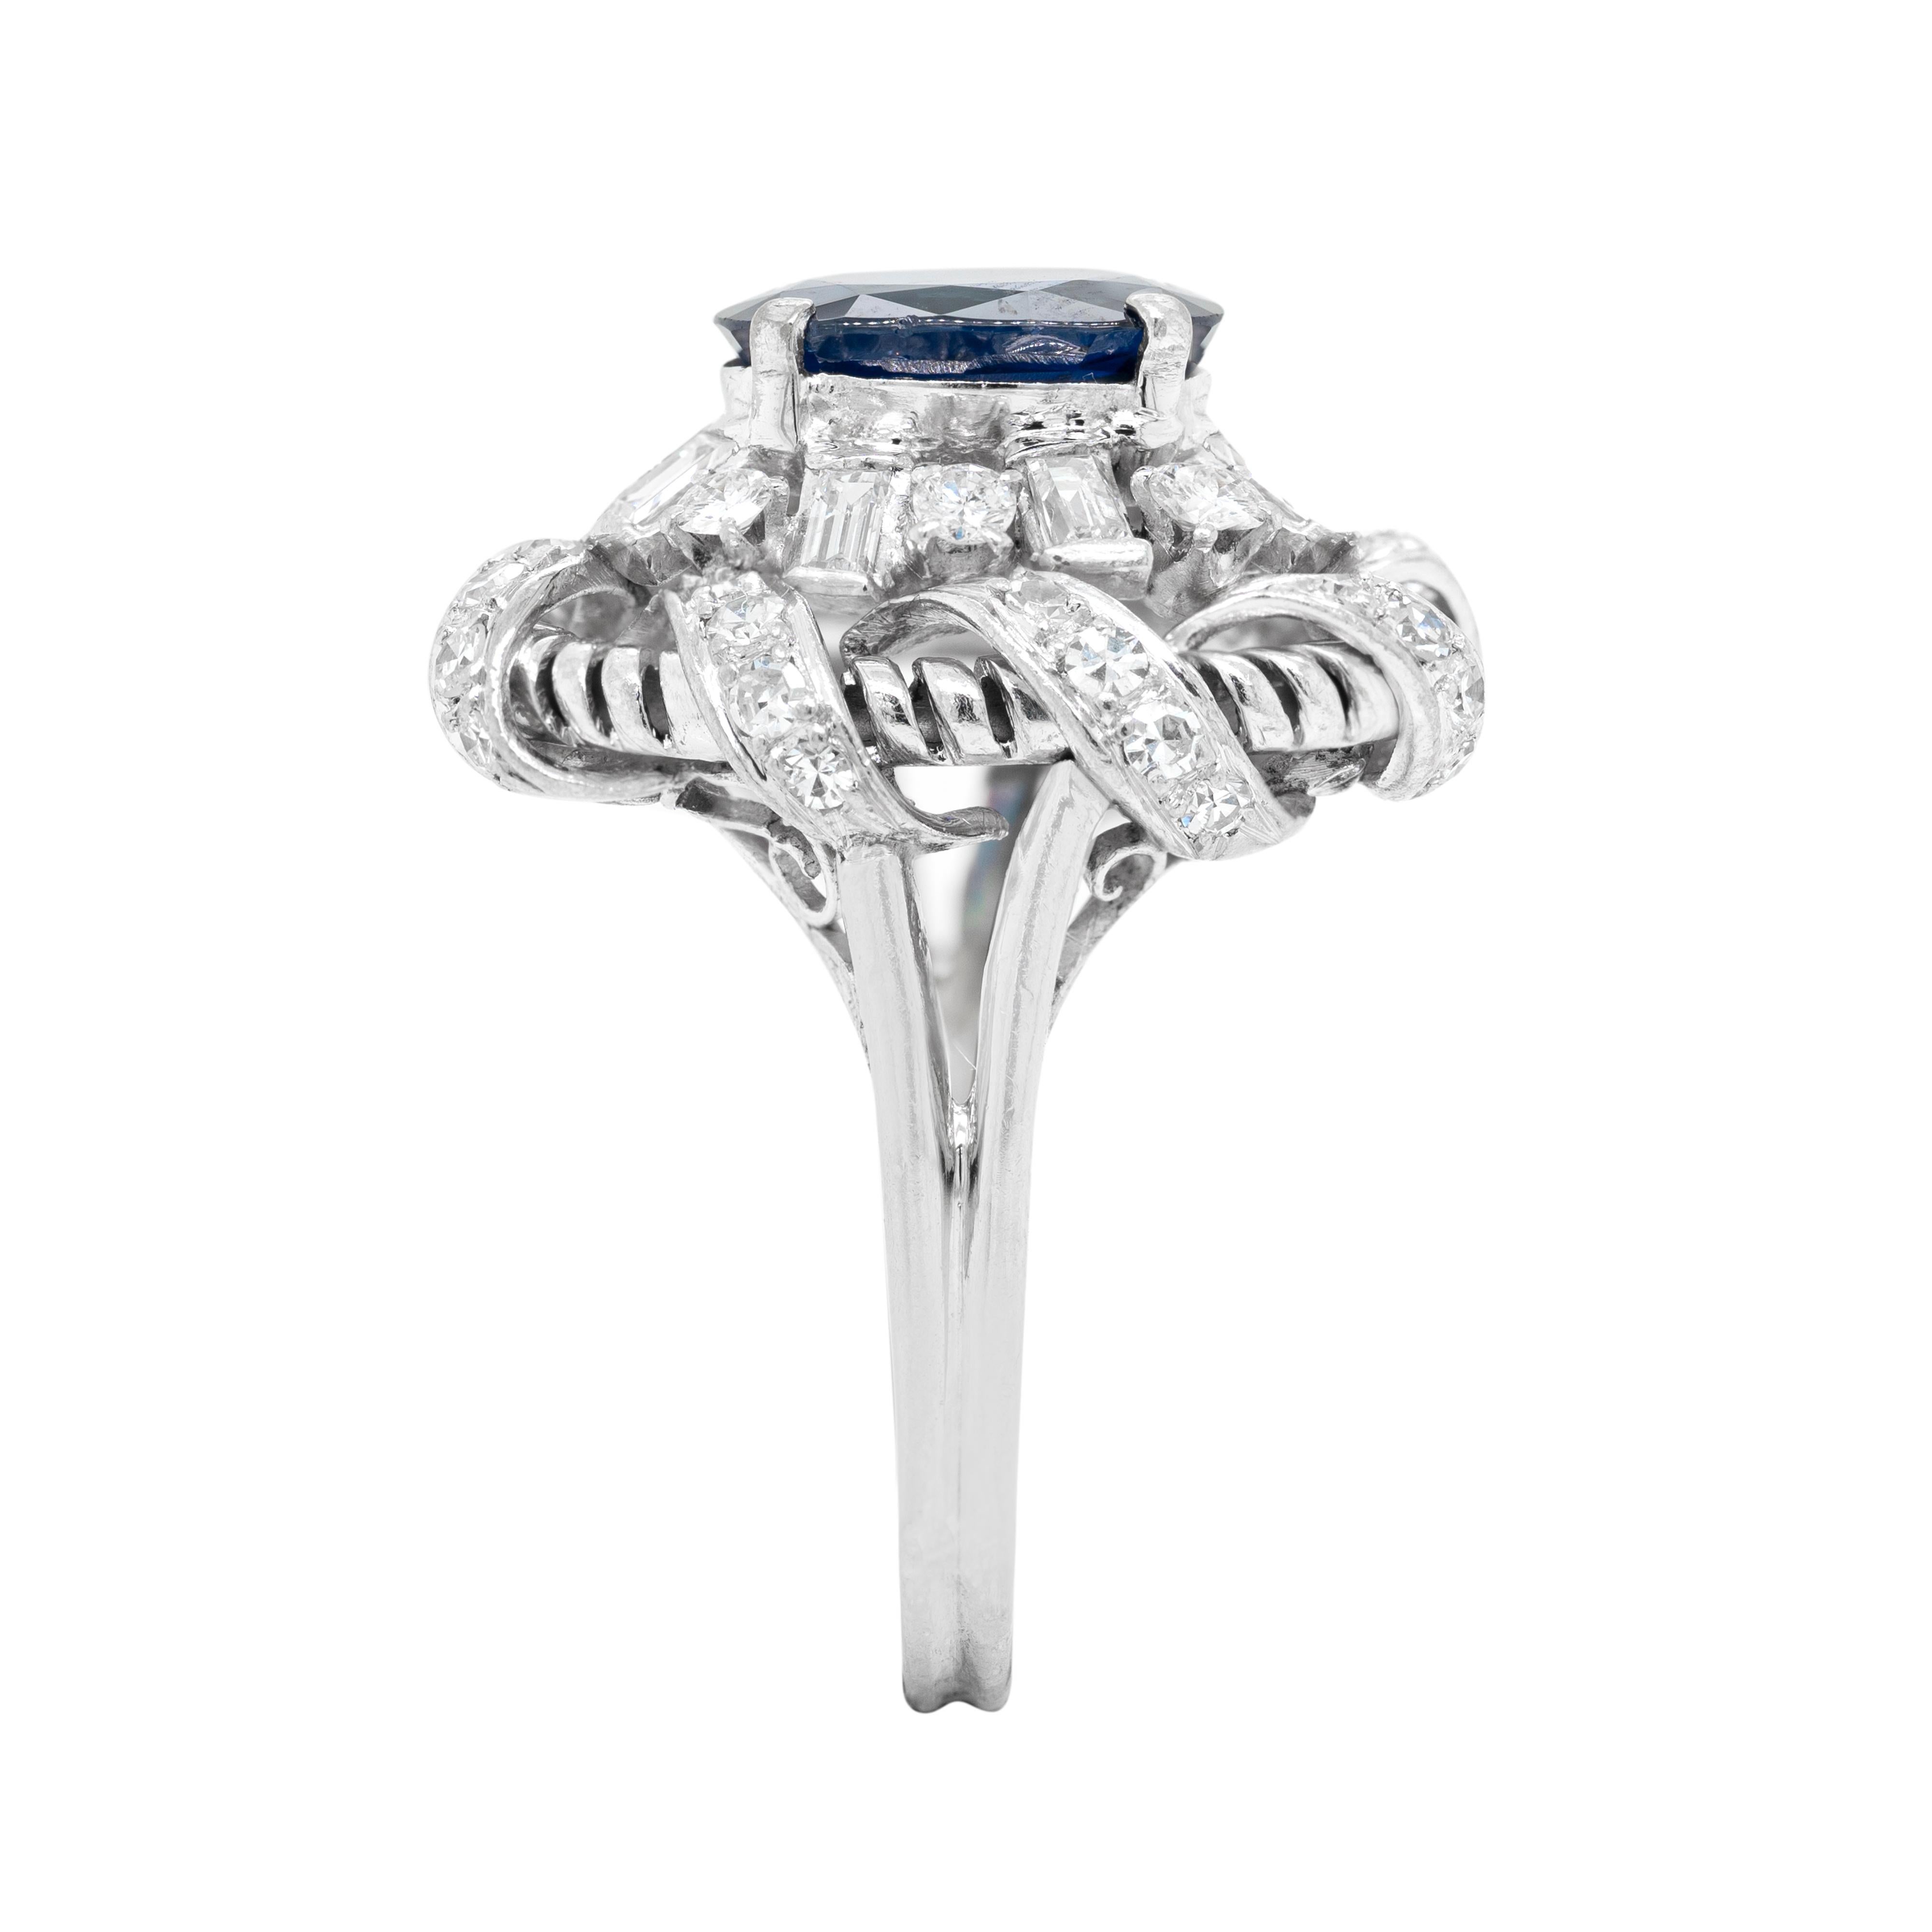 This wonderful vintage platinum cluster ring features a natural unheated  Burmese royal blue oval sapphire weighing 2.02ct in a four claw, open back setting. The vibrant stone is beautifully surrounded by a row of alternating semi rub-over set